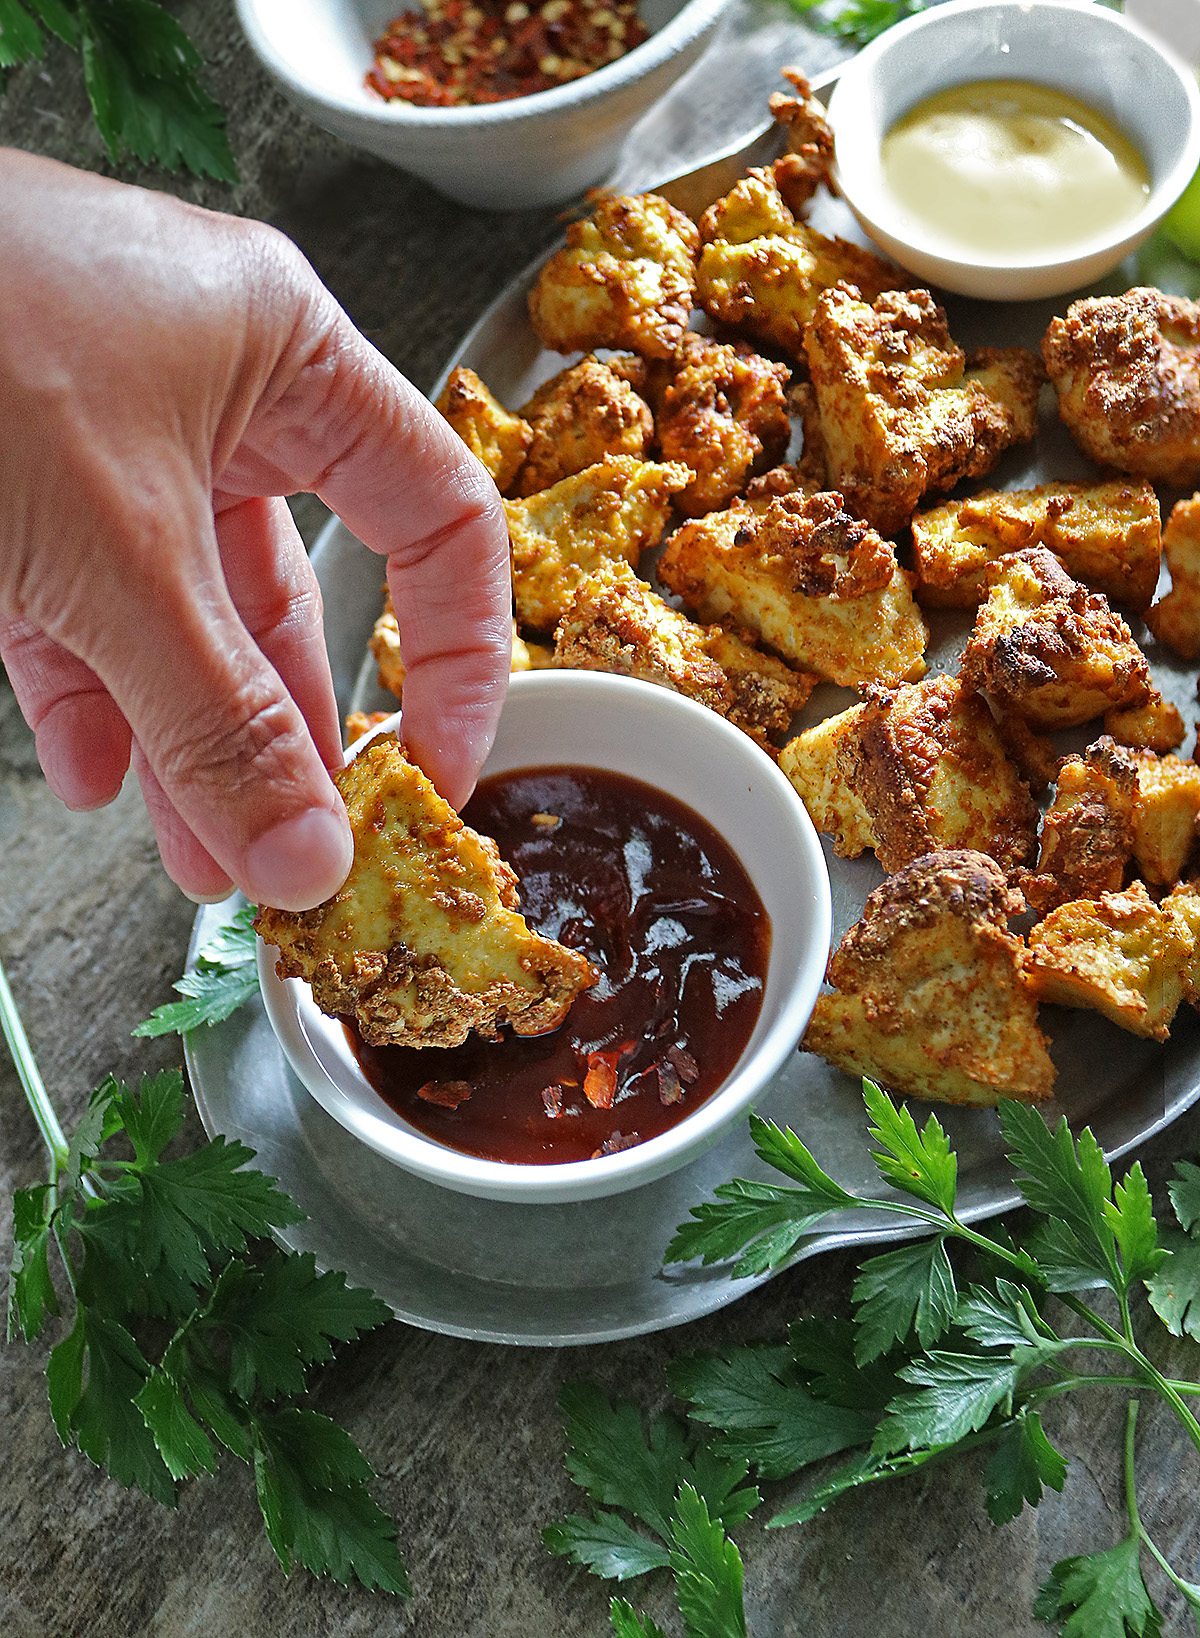 Air fried tofu - no draining required